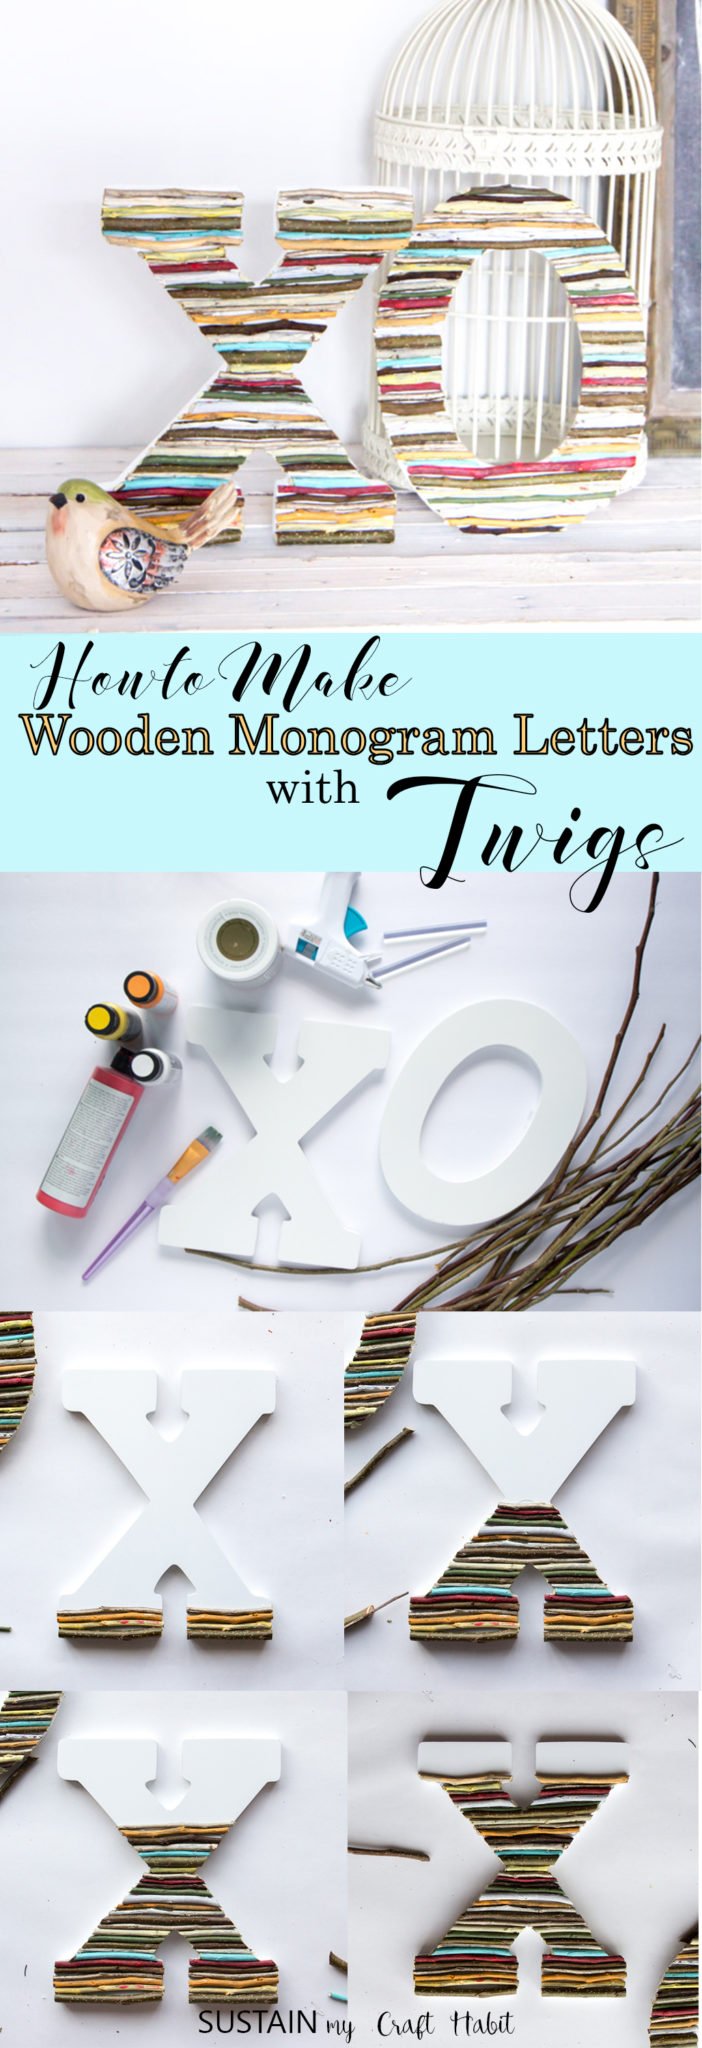 Collage of wooden monogram letters embellished with painted twig pieces